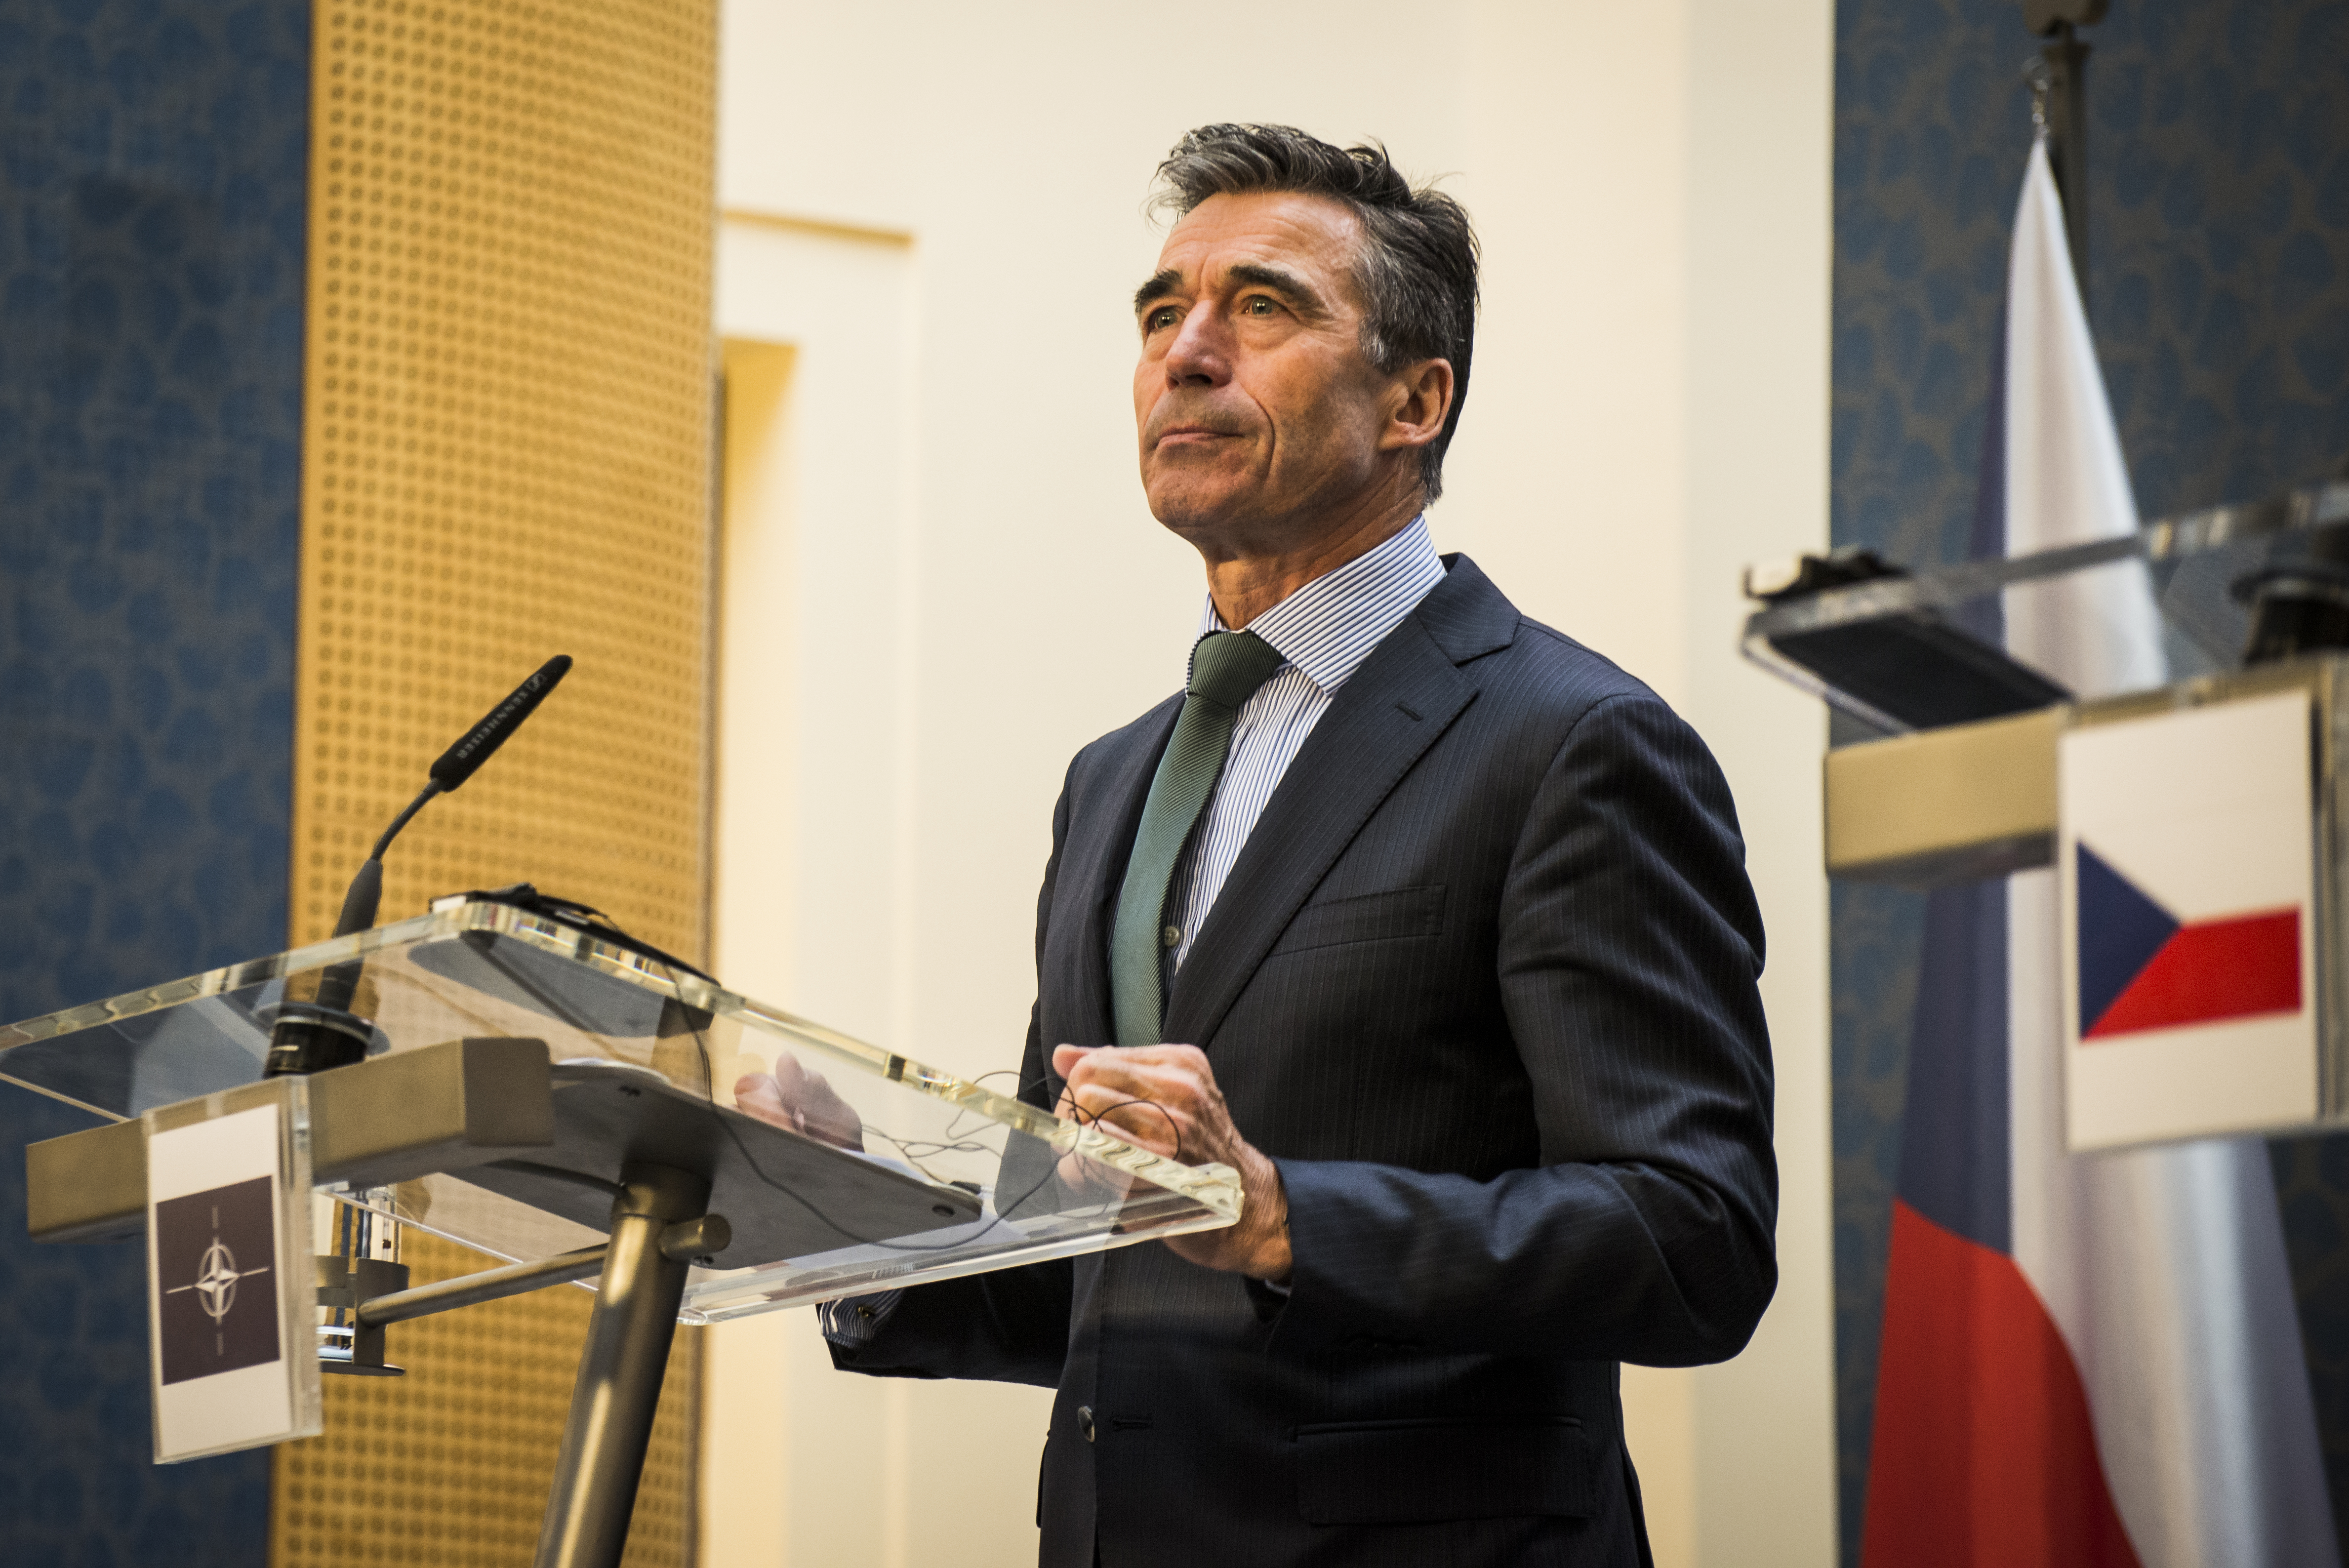 Anders Fogh Rasmussen speaks at a press conference in Prague on April 10, 2014. He issued dire warnings on the Russian troop build-up on Ukraine's border (isifa&amp;mdash;Getty Images)